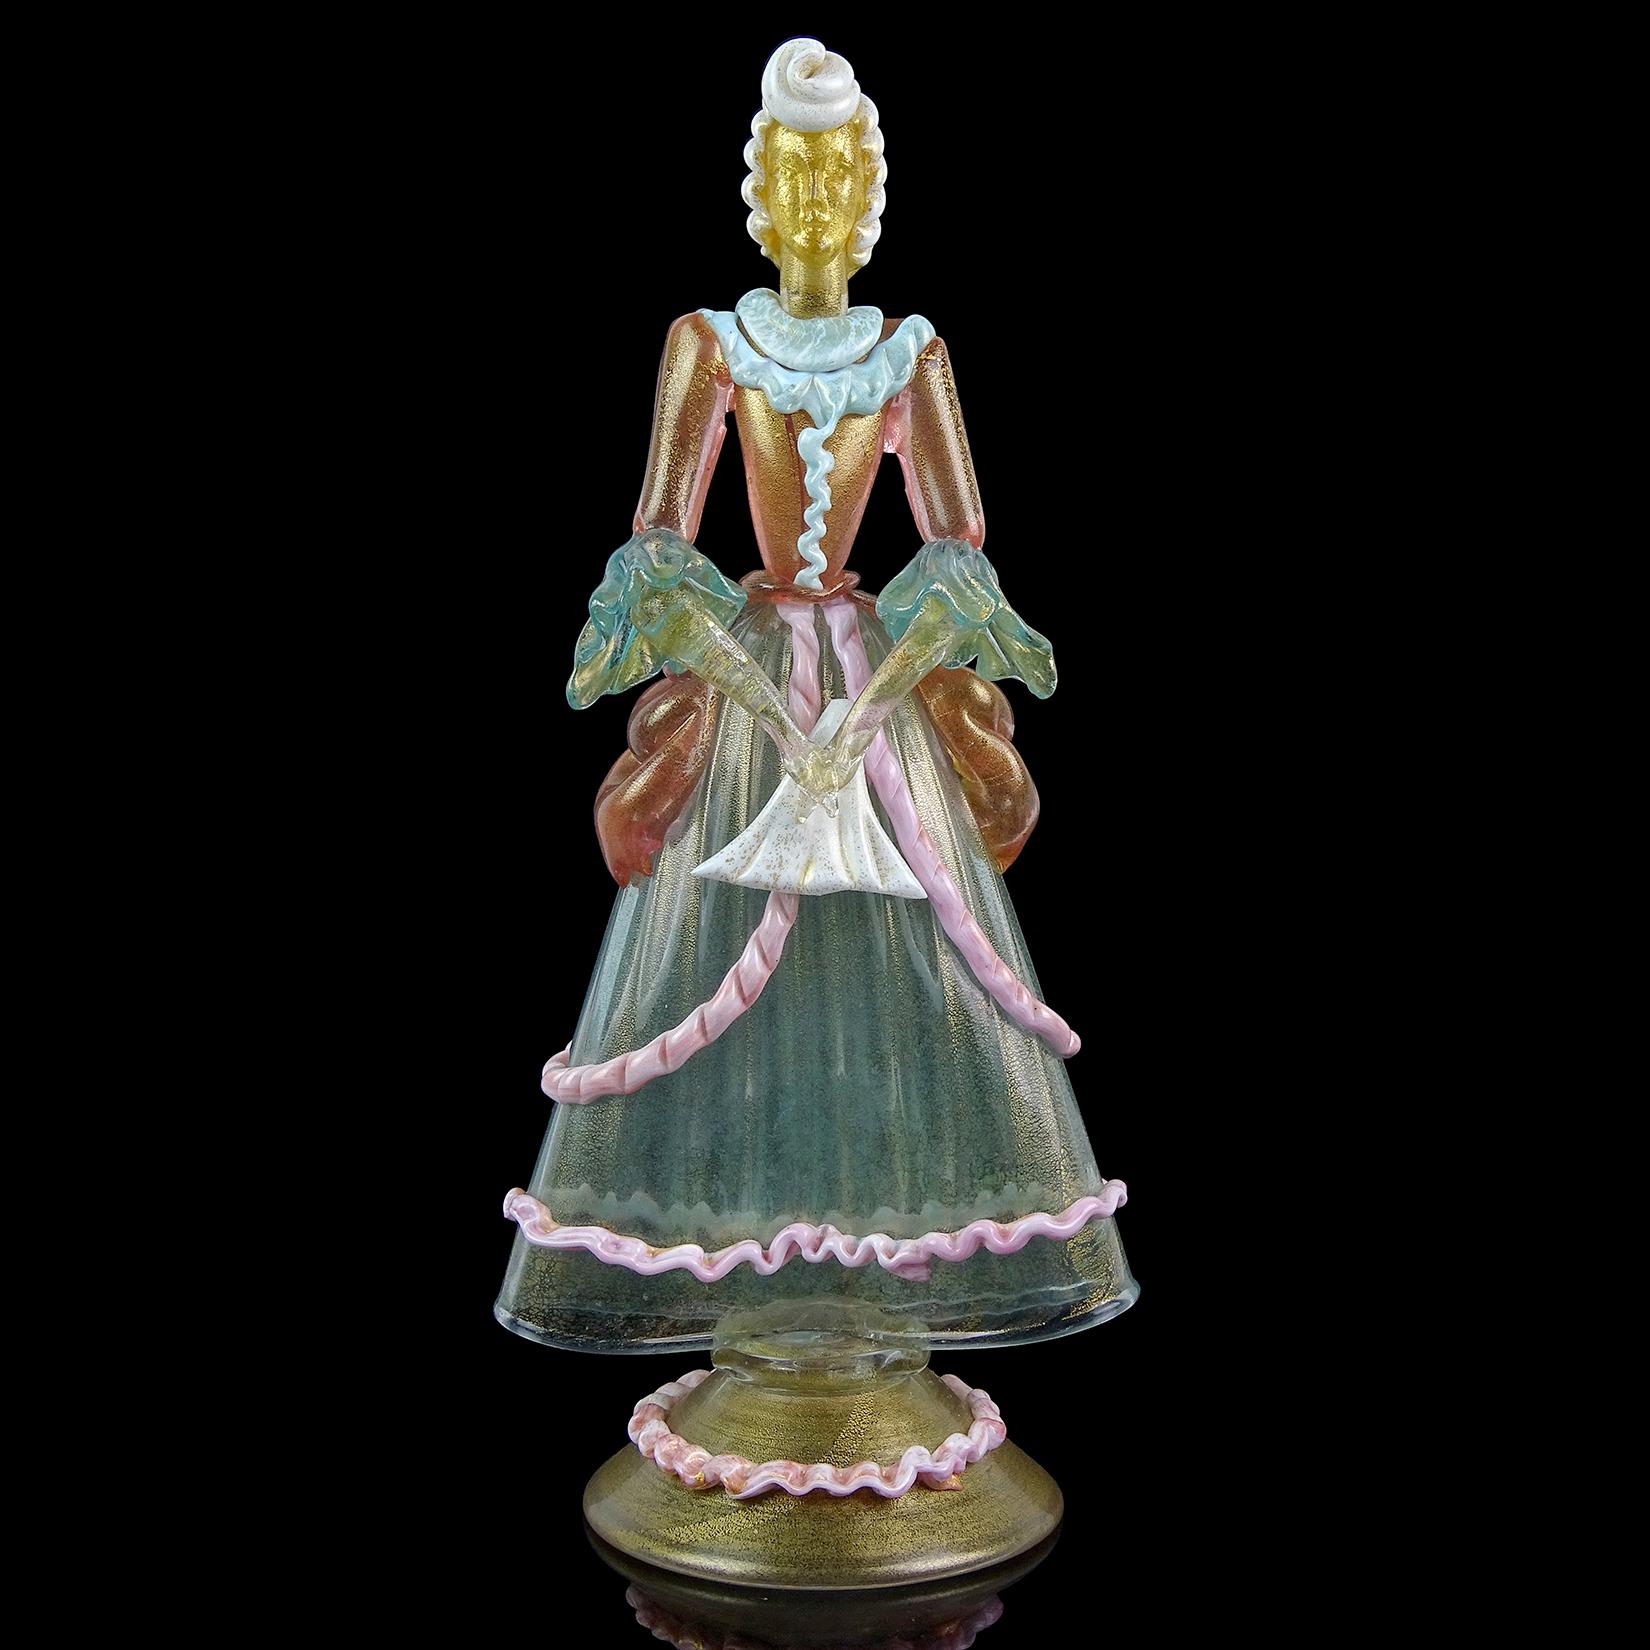 Beautiful large, vintage Murano handblown transparent aqua, pink, sky blue, white and gold flecks Italian art glass Victorian woman sculpture. Starting from the top, she has large twisted white top bun hairstyle. Large sky blue double collar with